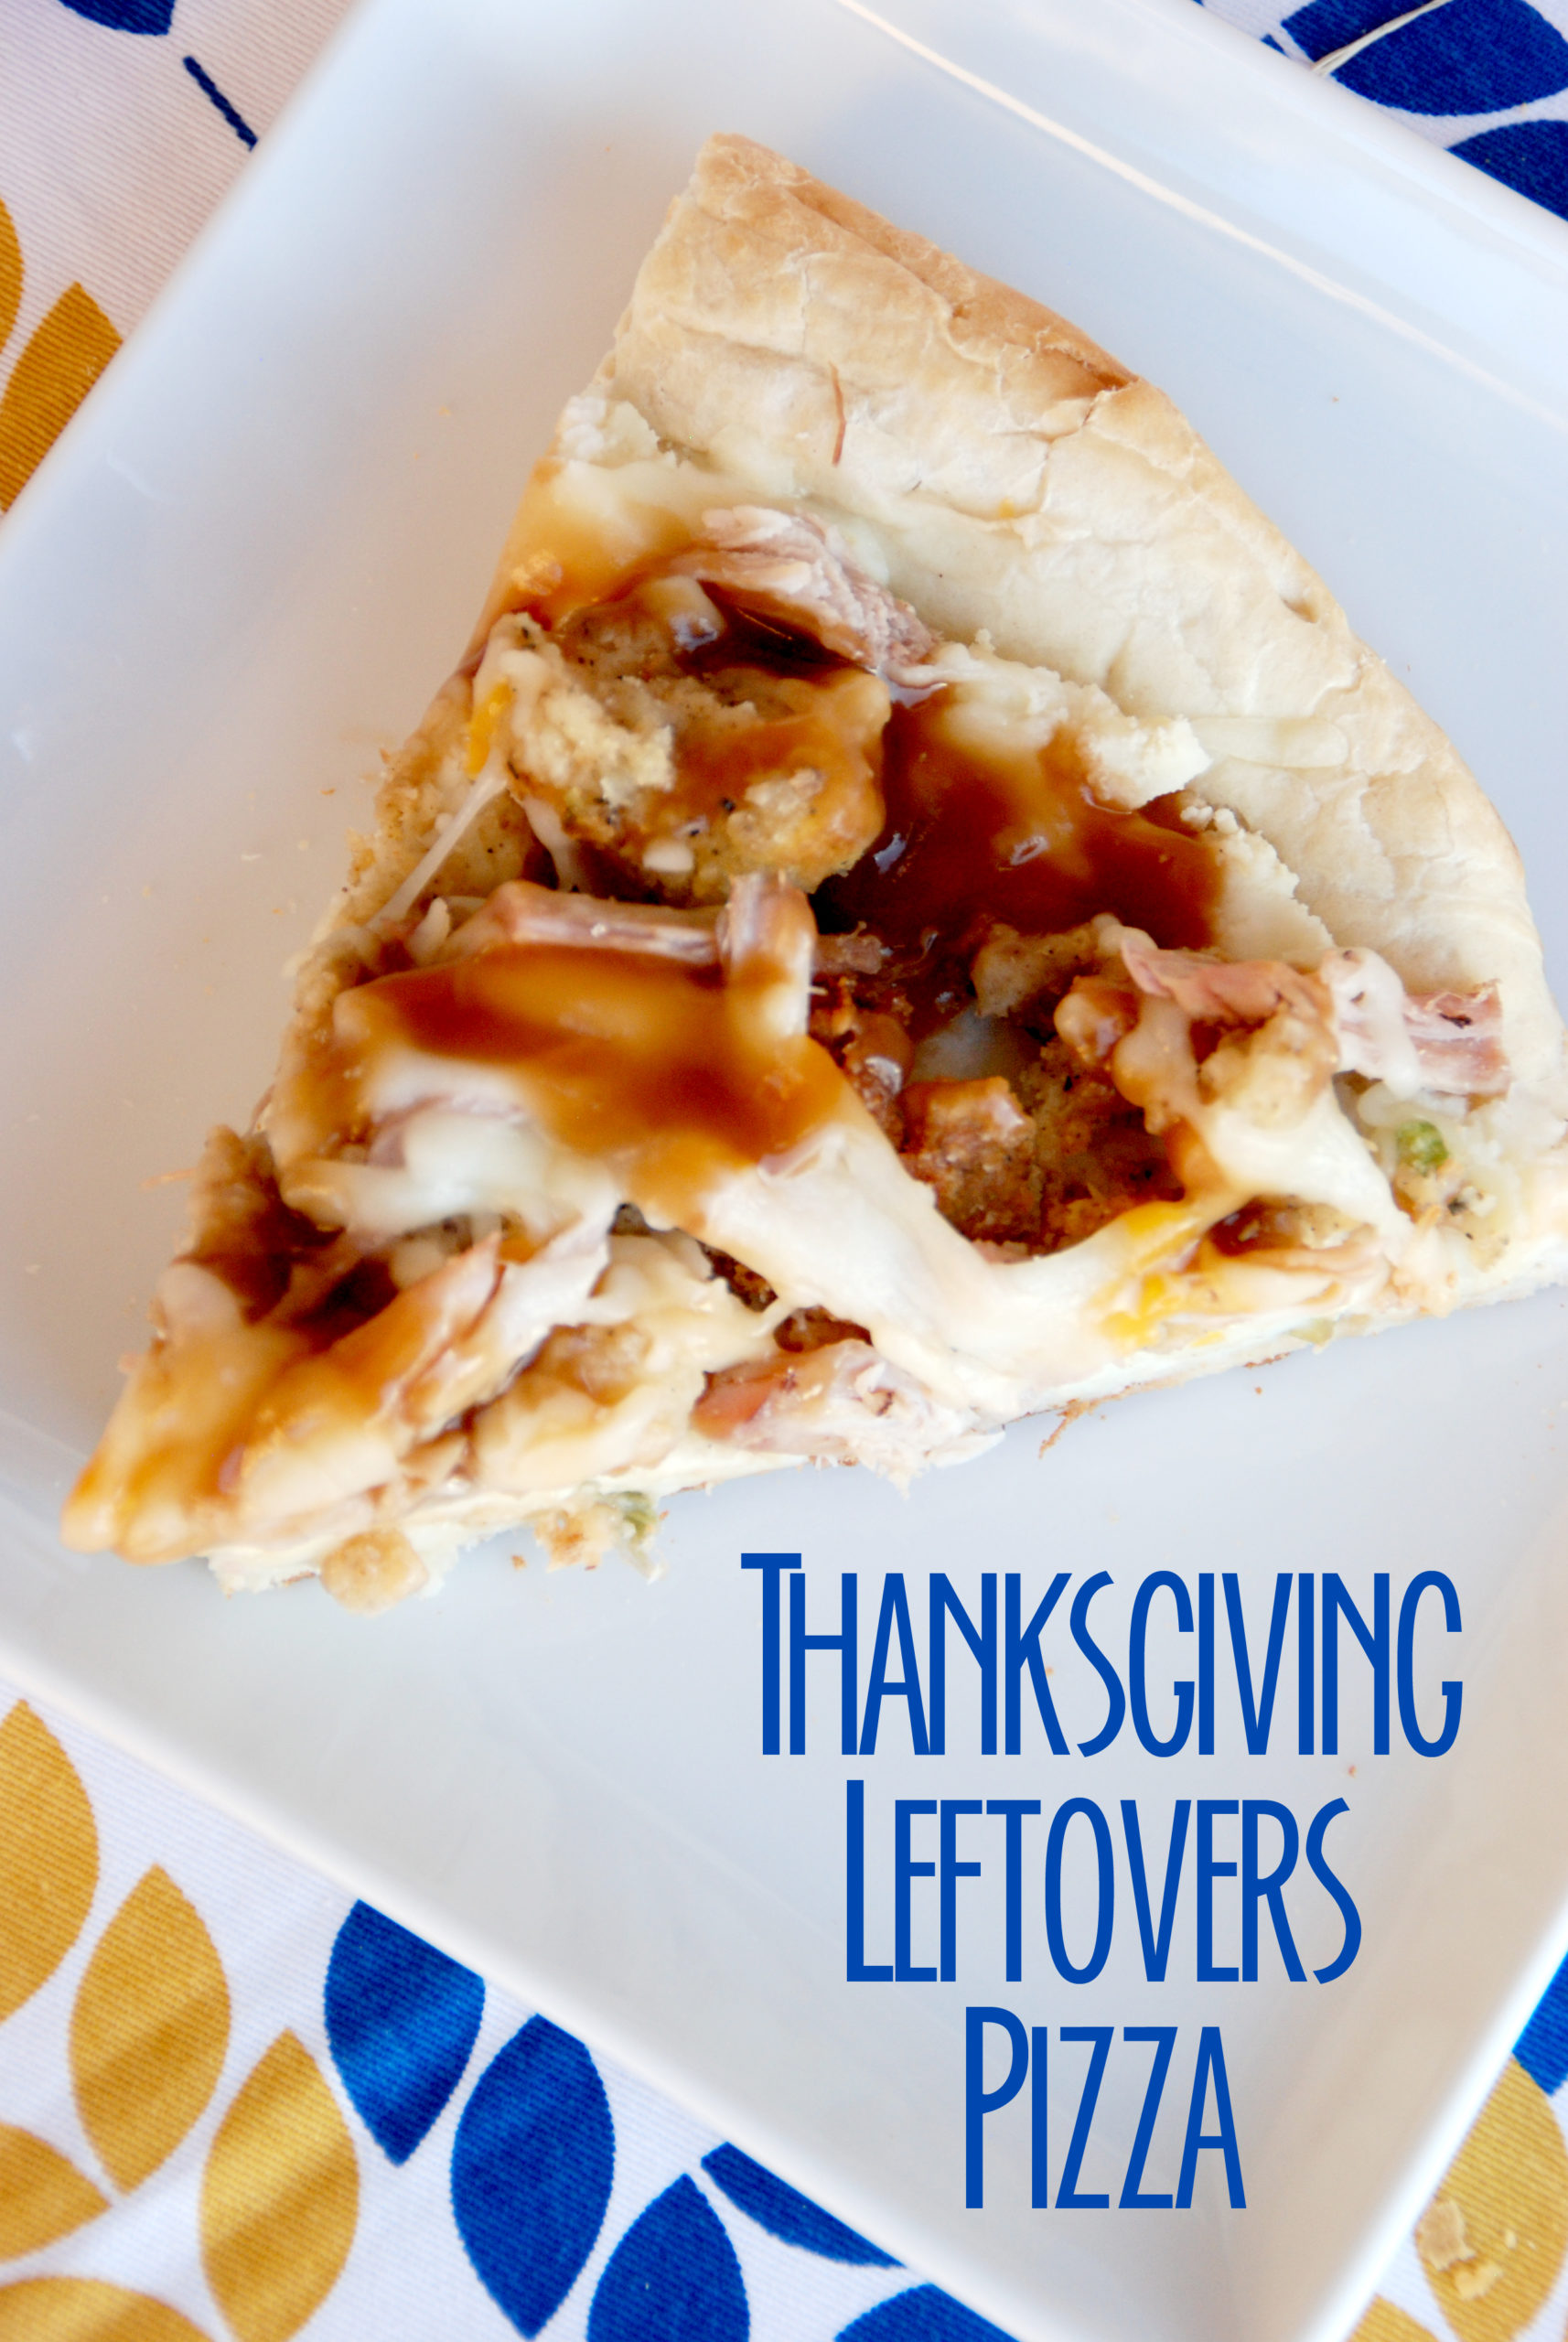 Thanksgiving Leftovers Recipe (thanksgiving pizza)